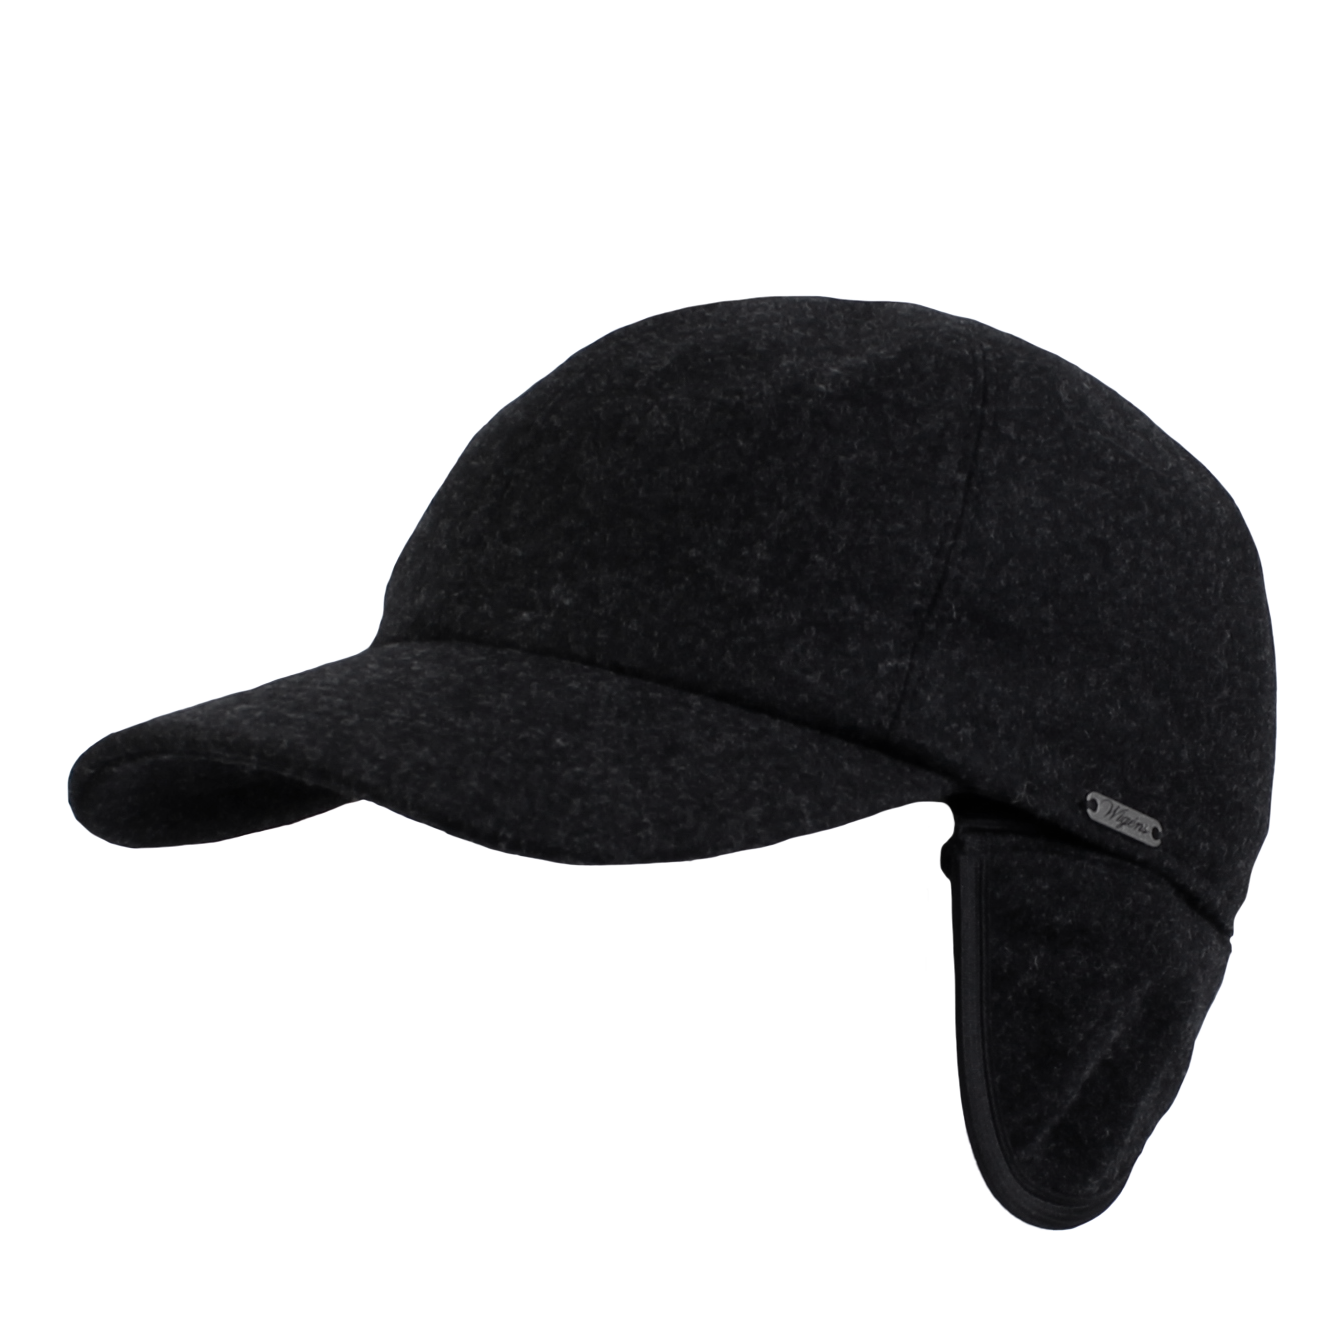 Melton Wool Baseball Classic Cap with Earflaps in Black by Wigens